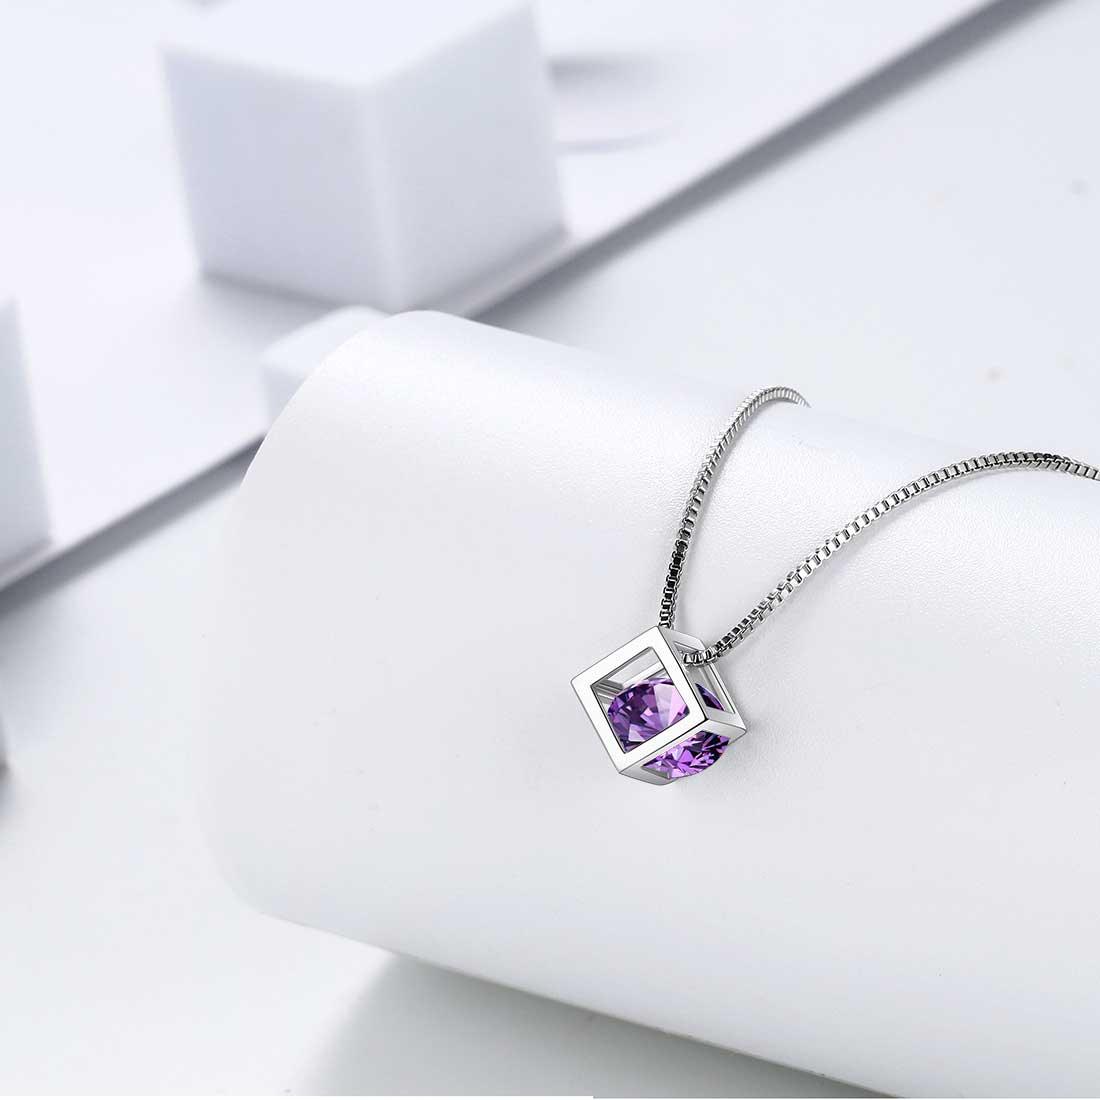 3D Cube Birthstone February Amethyst Necklace Sterling Silver - Necklaces - Aurora Tears